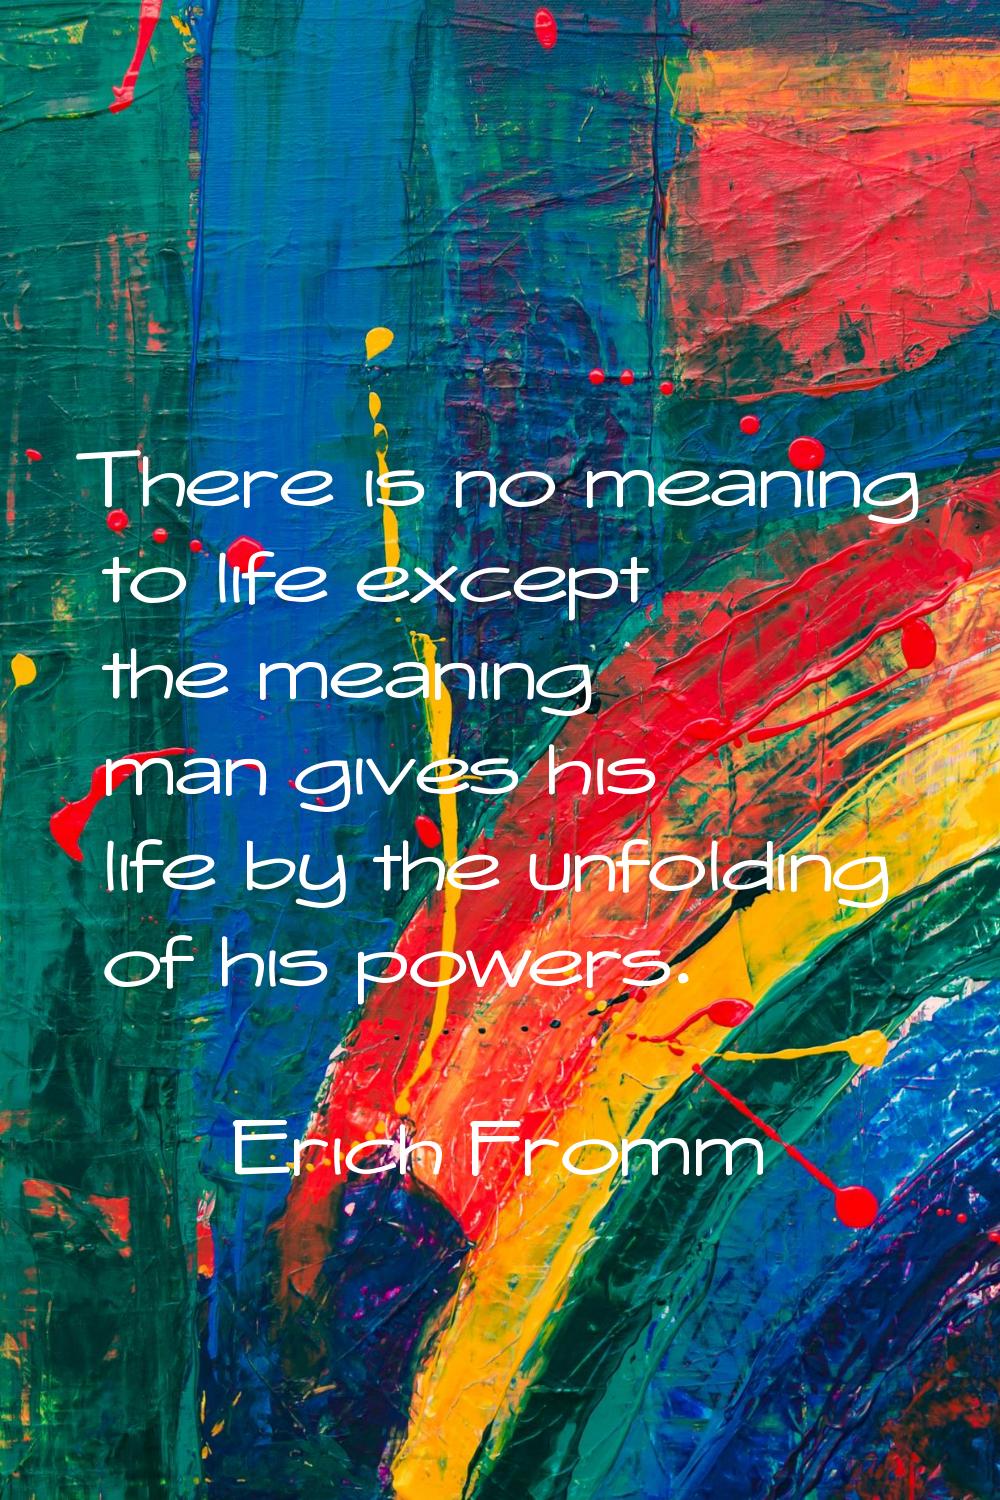 There is no meaning to life except the meaning man gives his life by the unfolding of his powers.